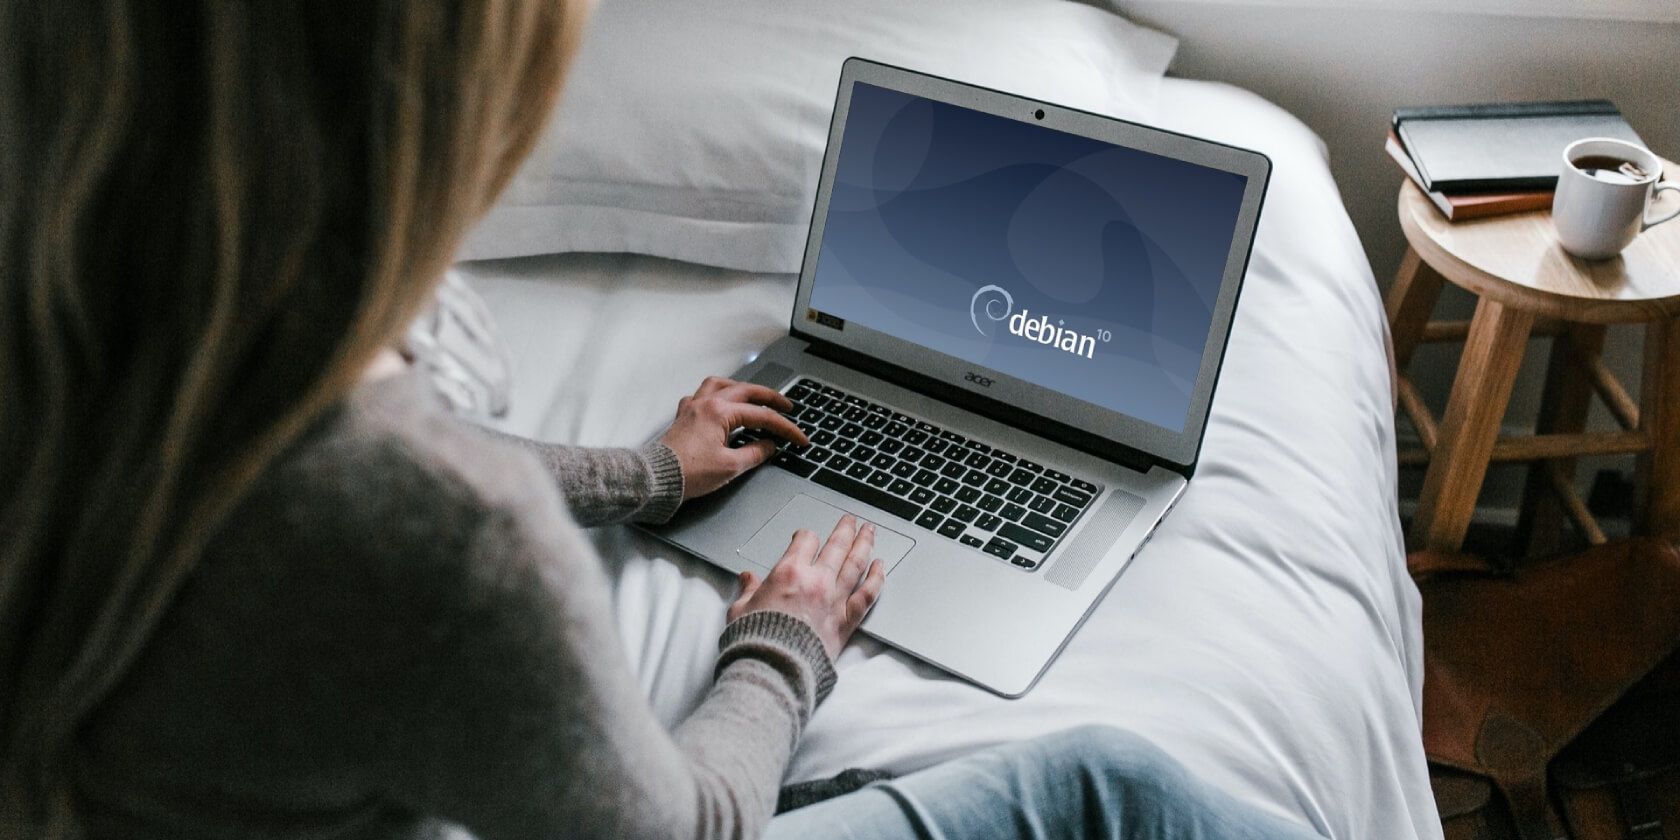 Woman sitting on bed using laptop with Debian